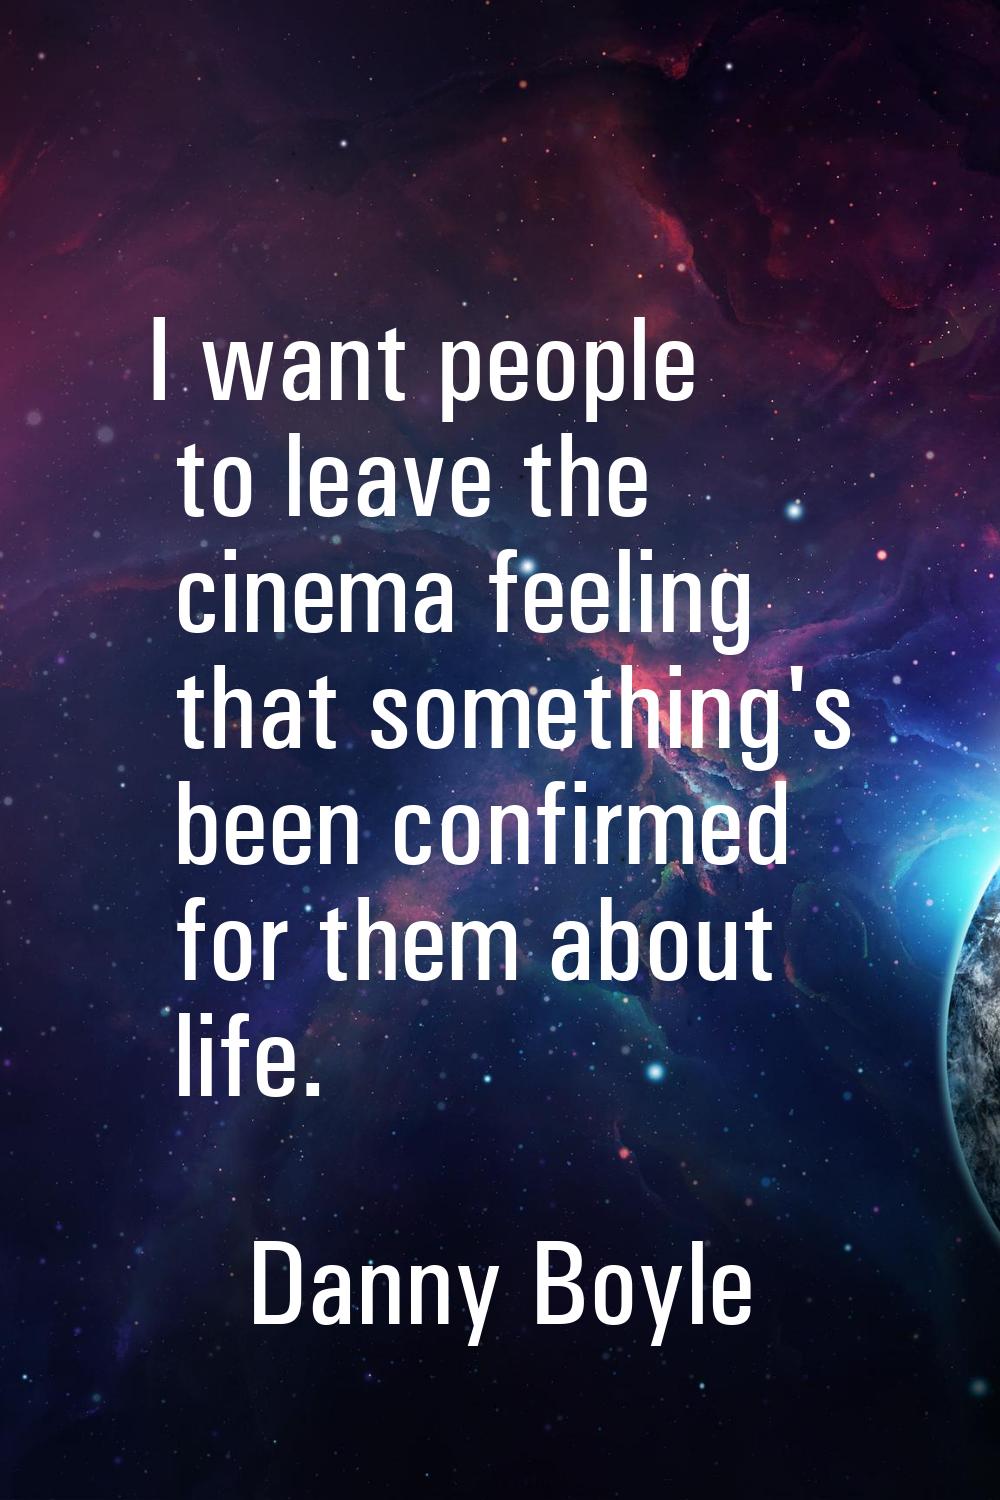 I want people to leave the cinema feeling that something's been confirmed for them about life.